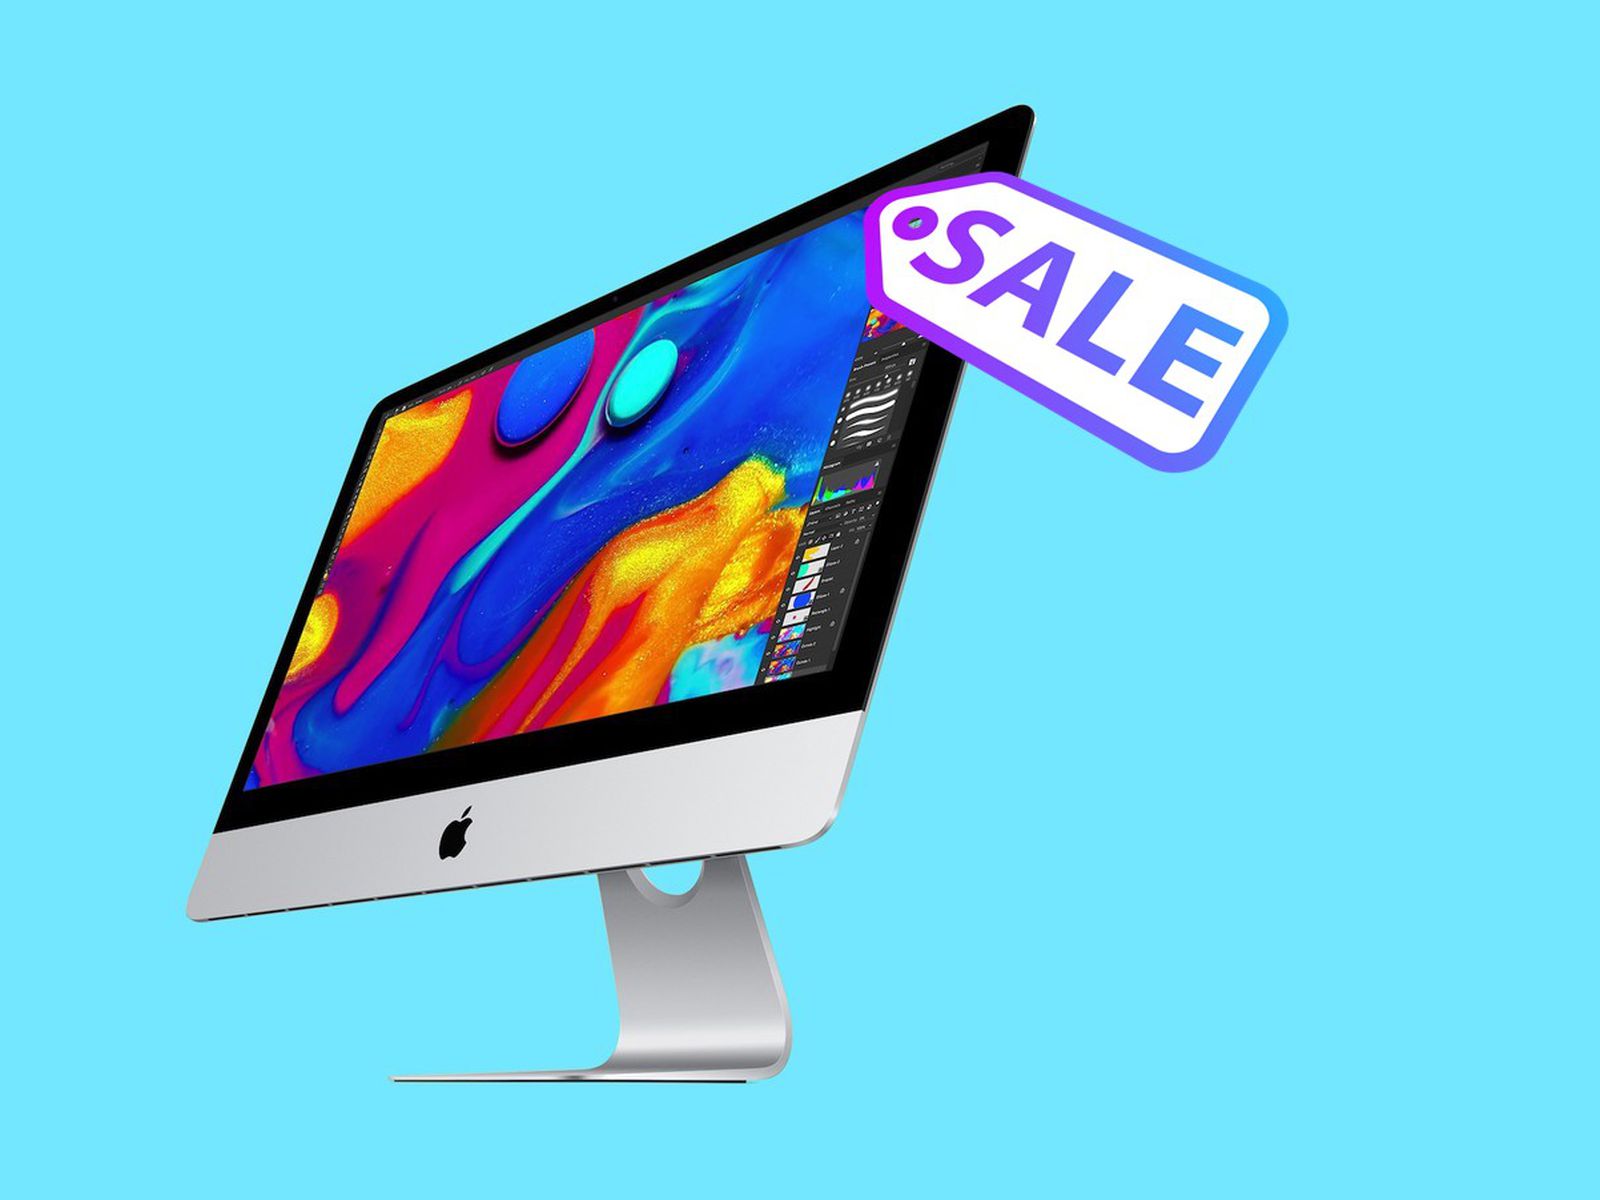 Deals: Amazon Expands Sales on 2020 iMacs, Now Including Both